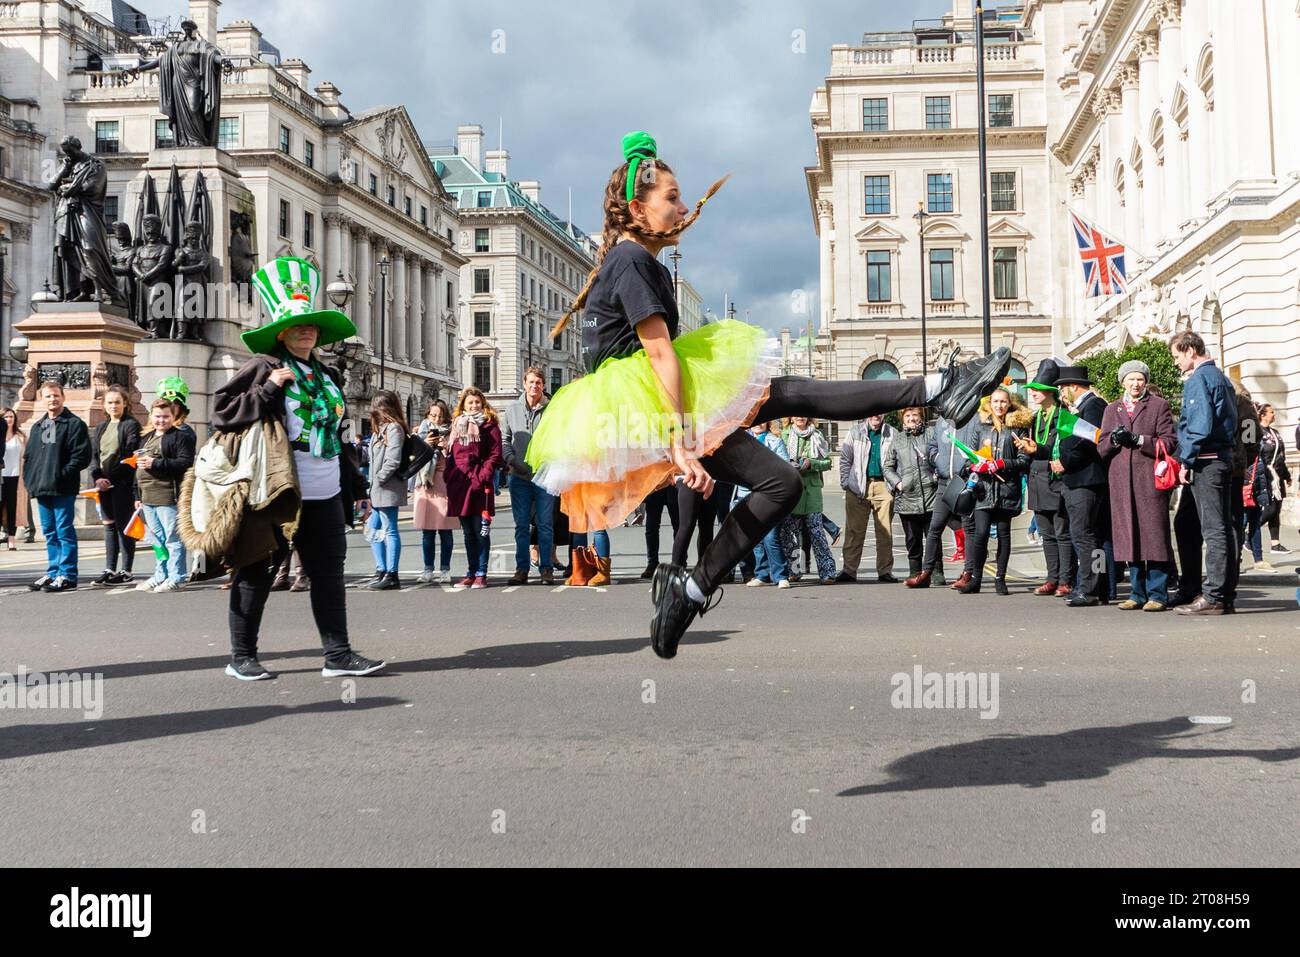 Irish Dancer of Drumenagh School at the 2017 St. Patrick's Day Parade in London, UK. Young female dancer leaping high with audience in street Stock Photo